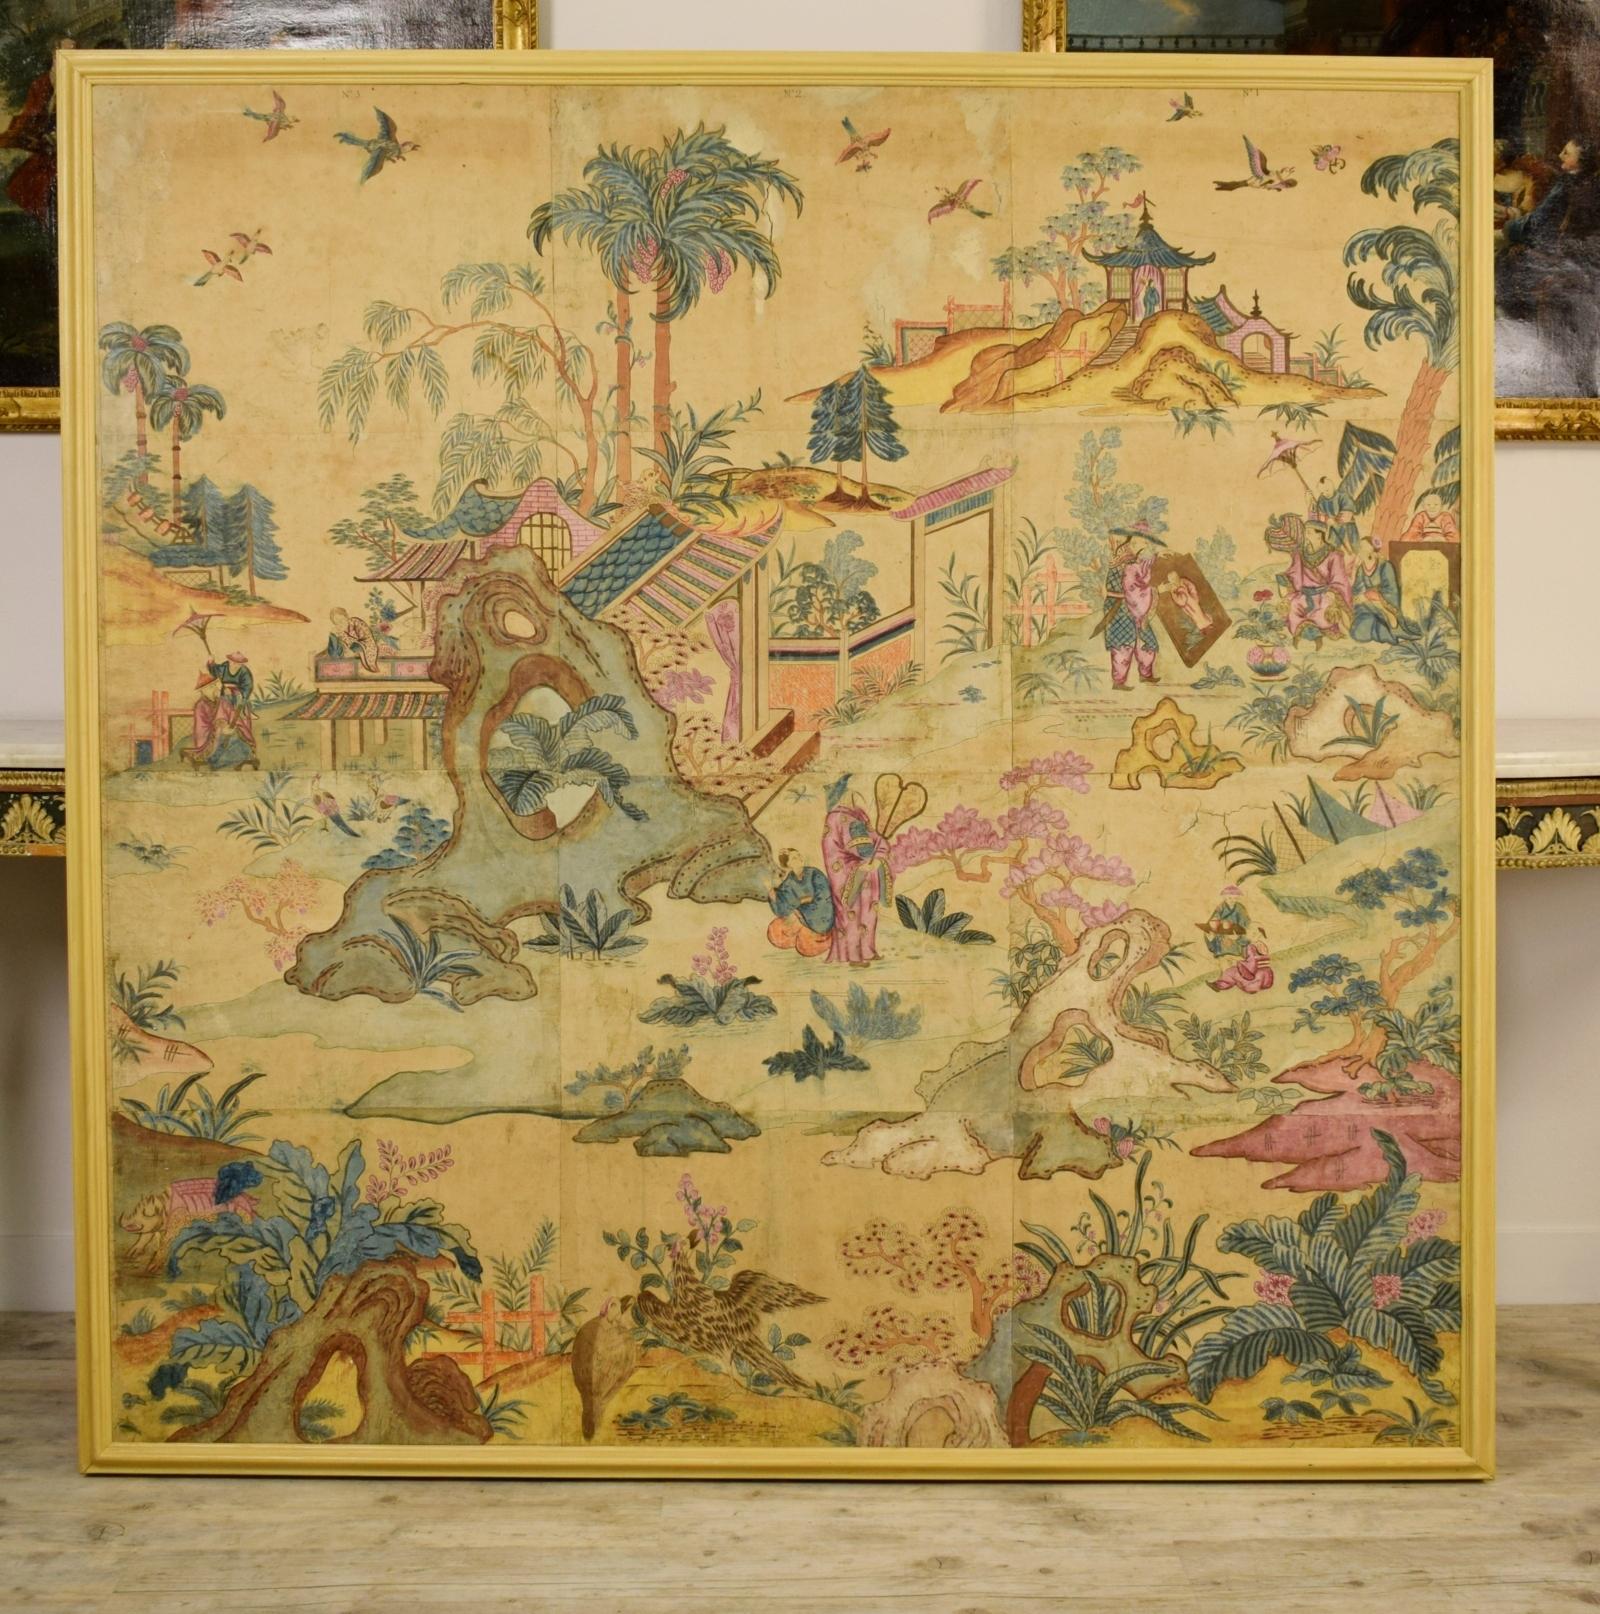 18th century, Italian polychrome tempera on paper chinoiserie painting
This large painting is made in tempera on paper, then applied on canvas. It was executed in Italy, in Turin, in the 18th century.
The polychrome painting depicts a subject to